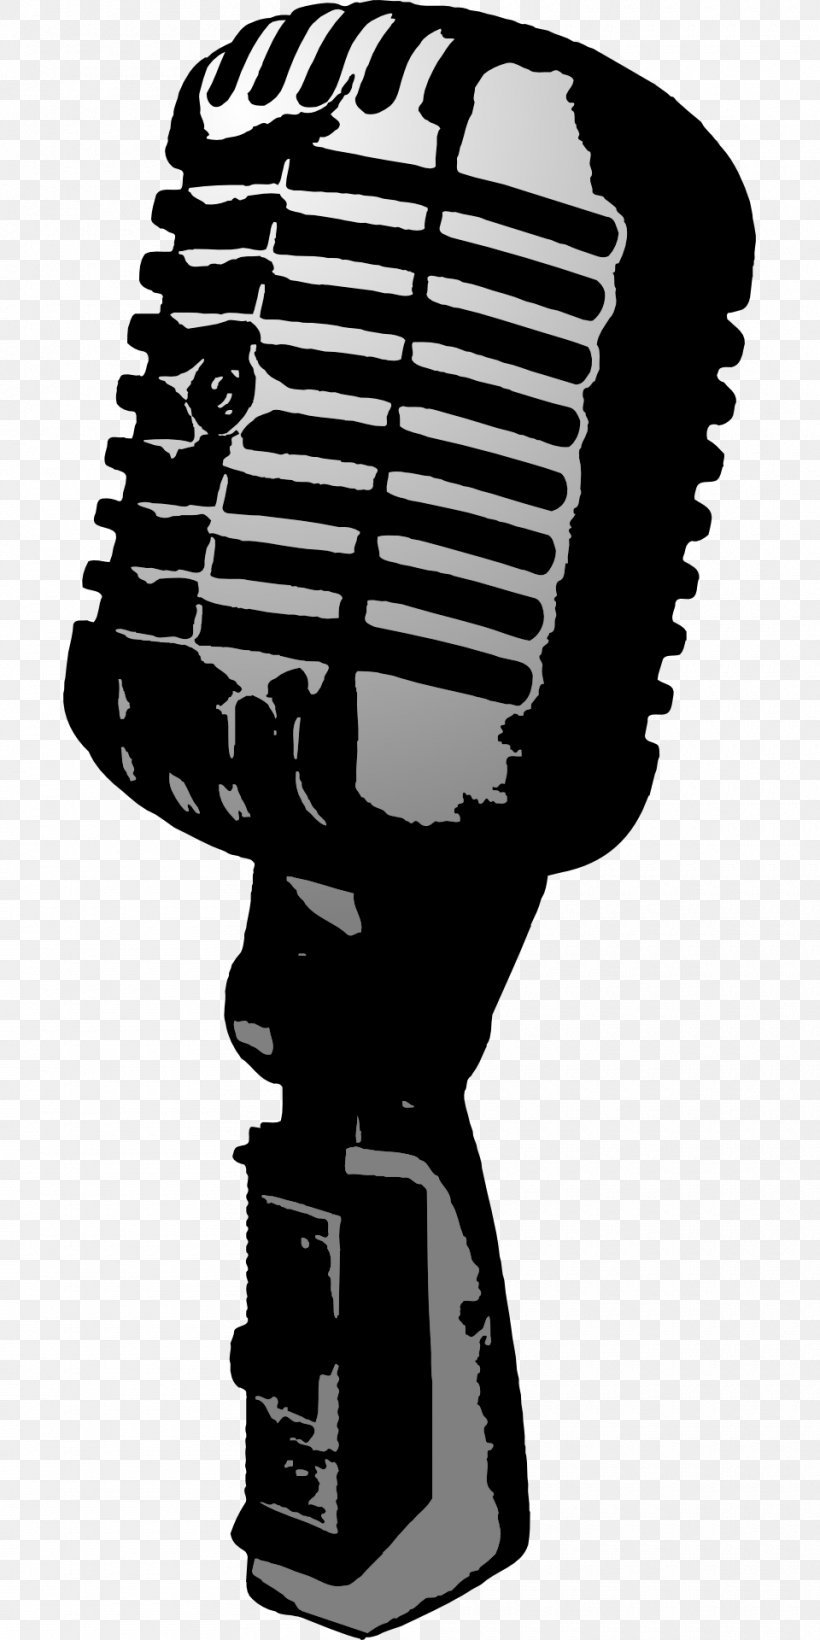 Microphone Clip Art Openclipart Image Illustration, PNG, 960x1920px, Microphone, Audio, Audio Equipment, Black And White, Cartoon Download Free